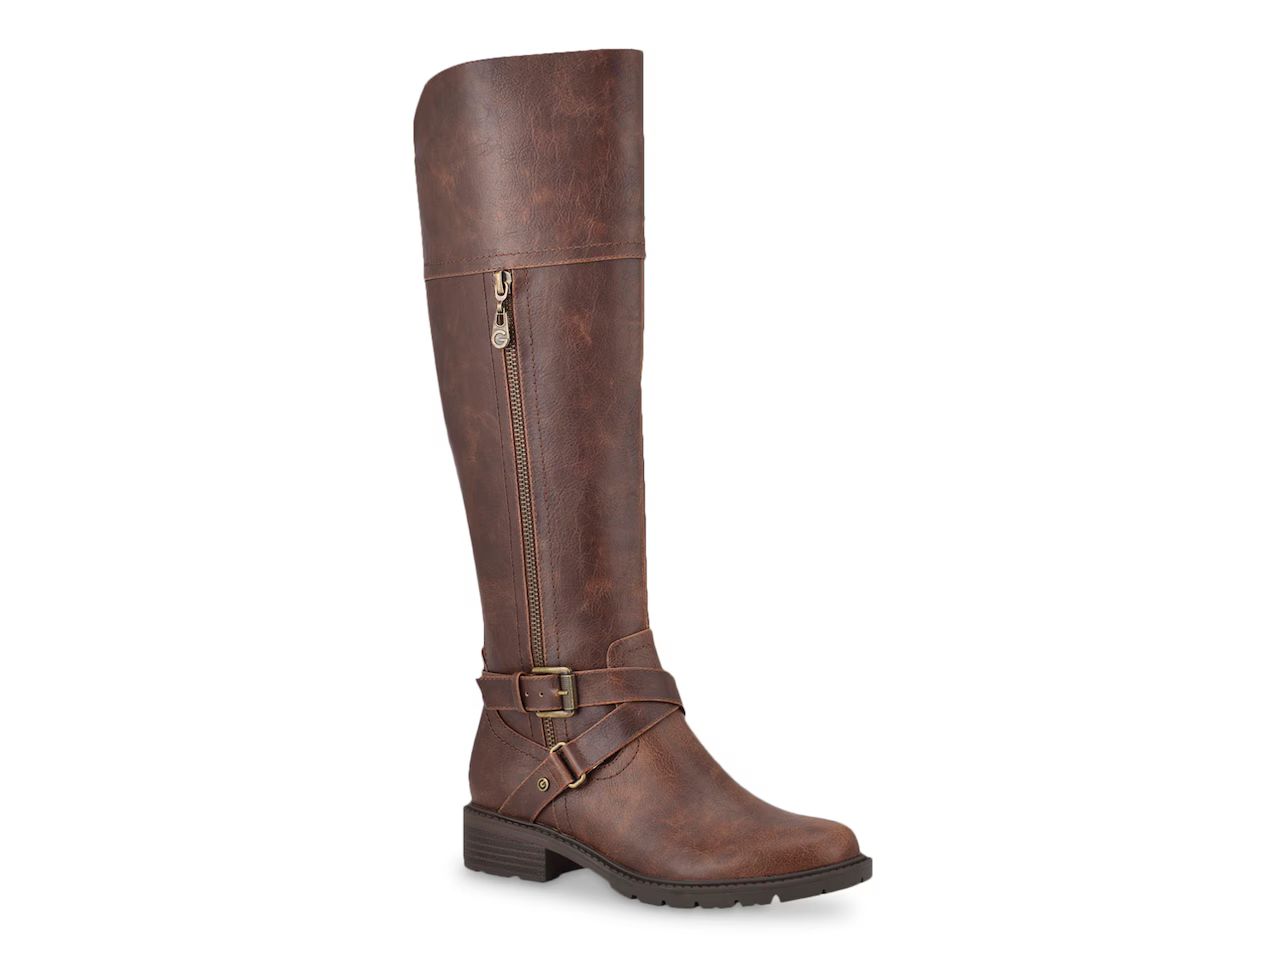 GBG Los Angeles Tallea Wide Calf Riding Boot | DSW